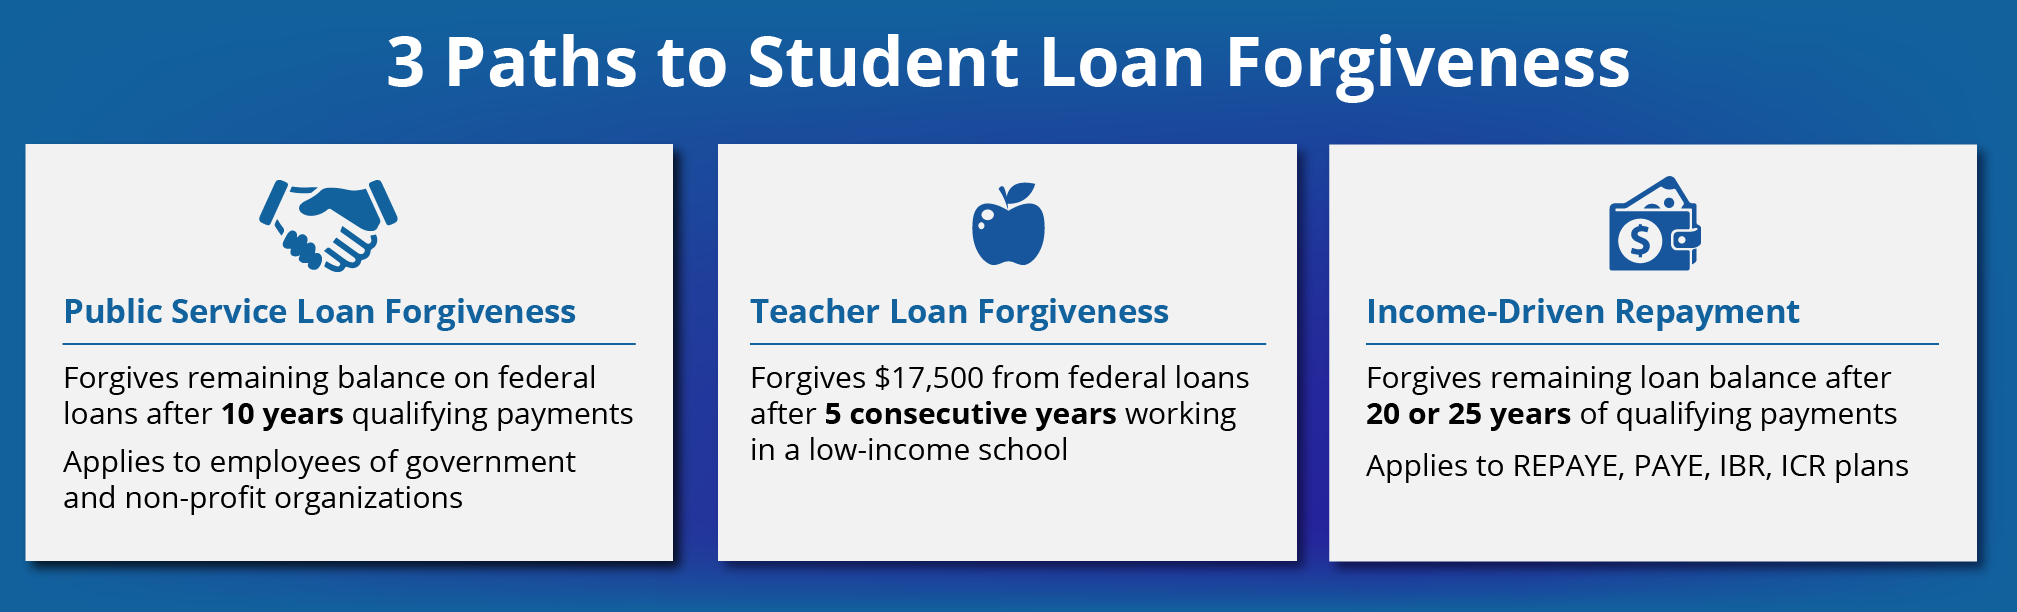 How to Qualify for Student Loan Forgiveness Cancellation or Discharge